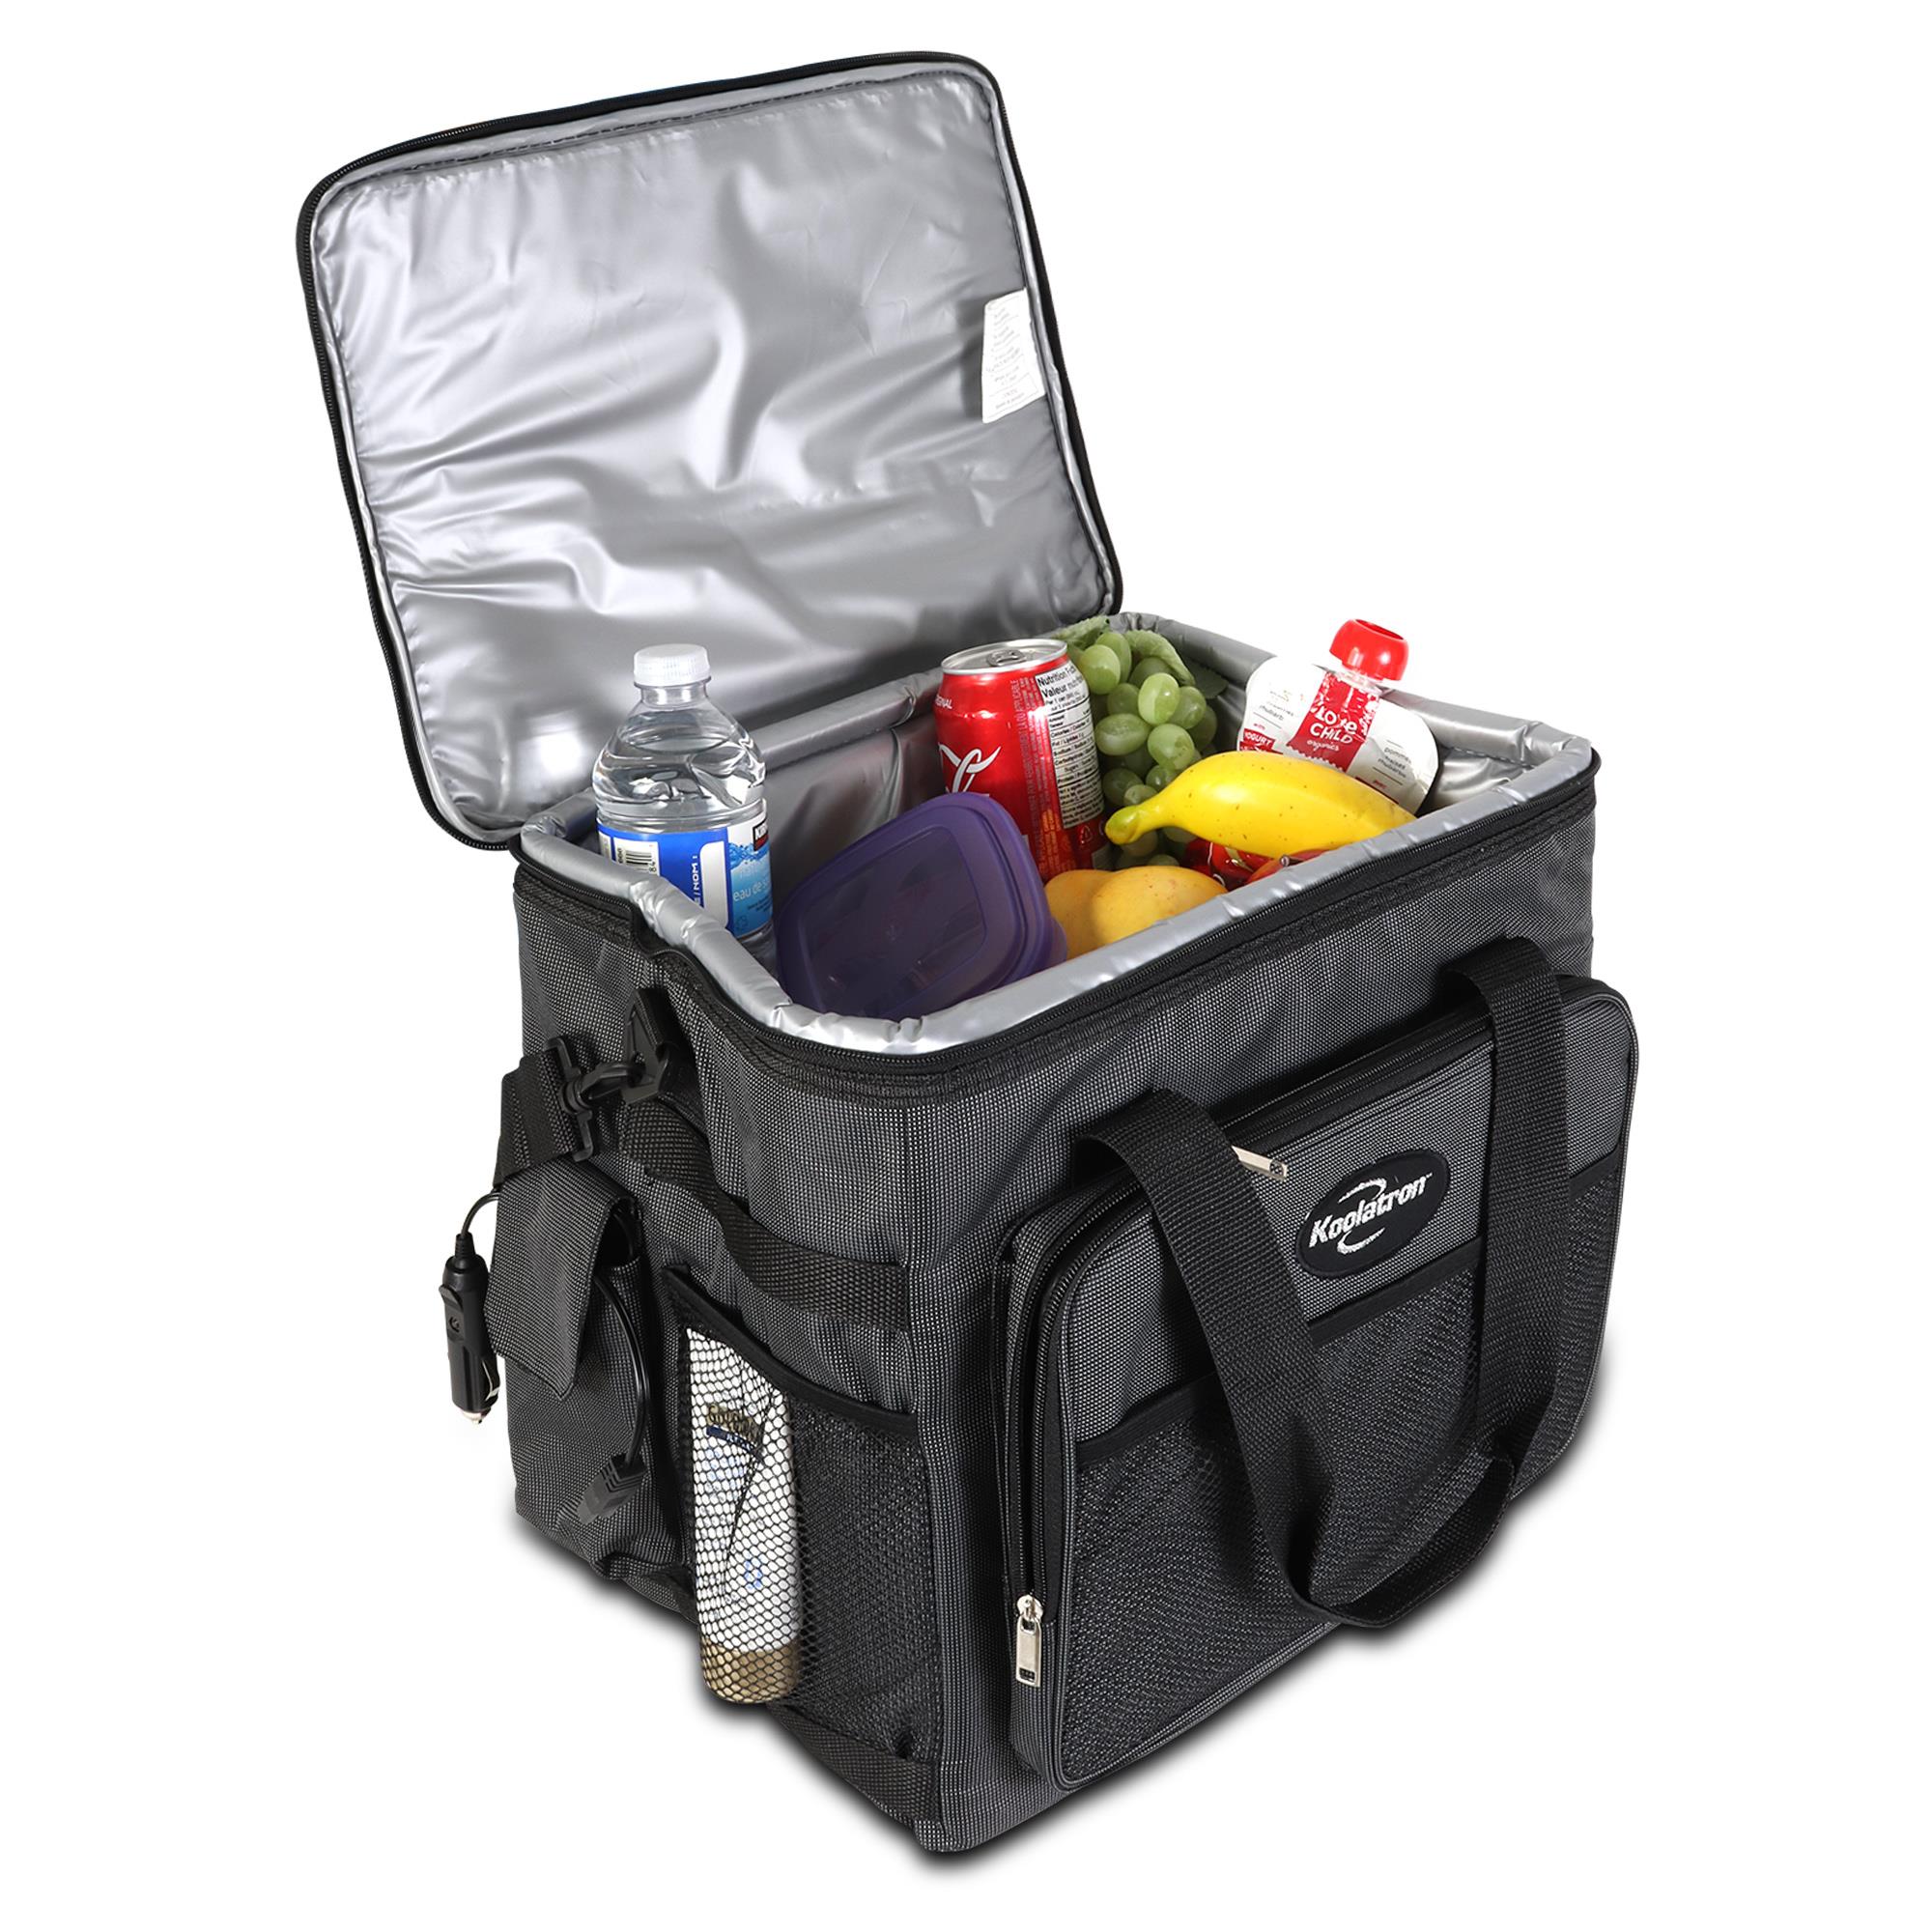 Salton Black 1.58 Insulated Self-heating Lunch Box in the Portable